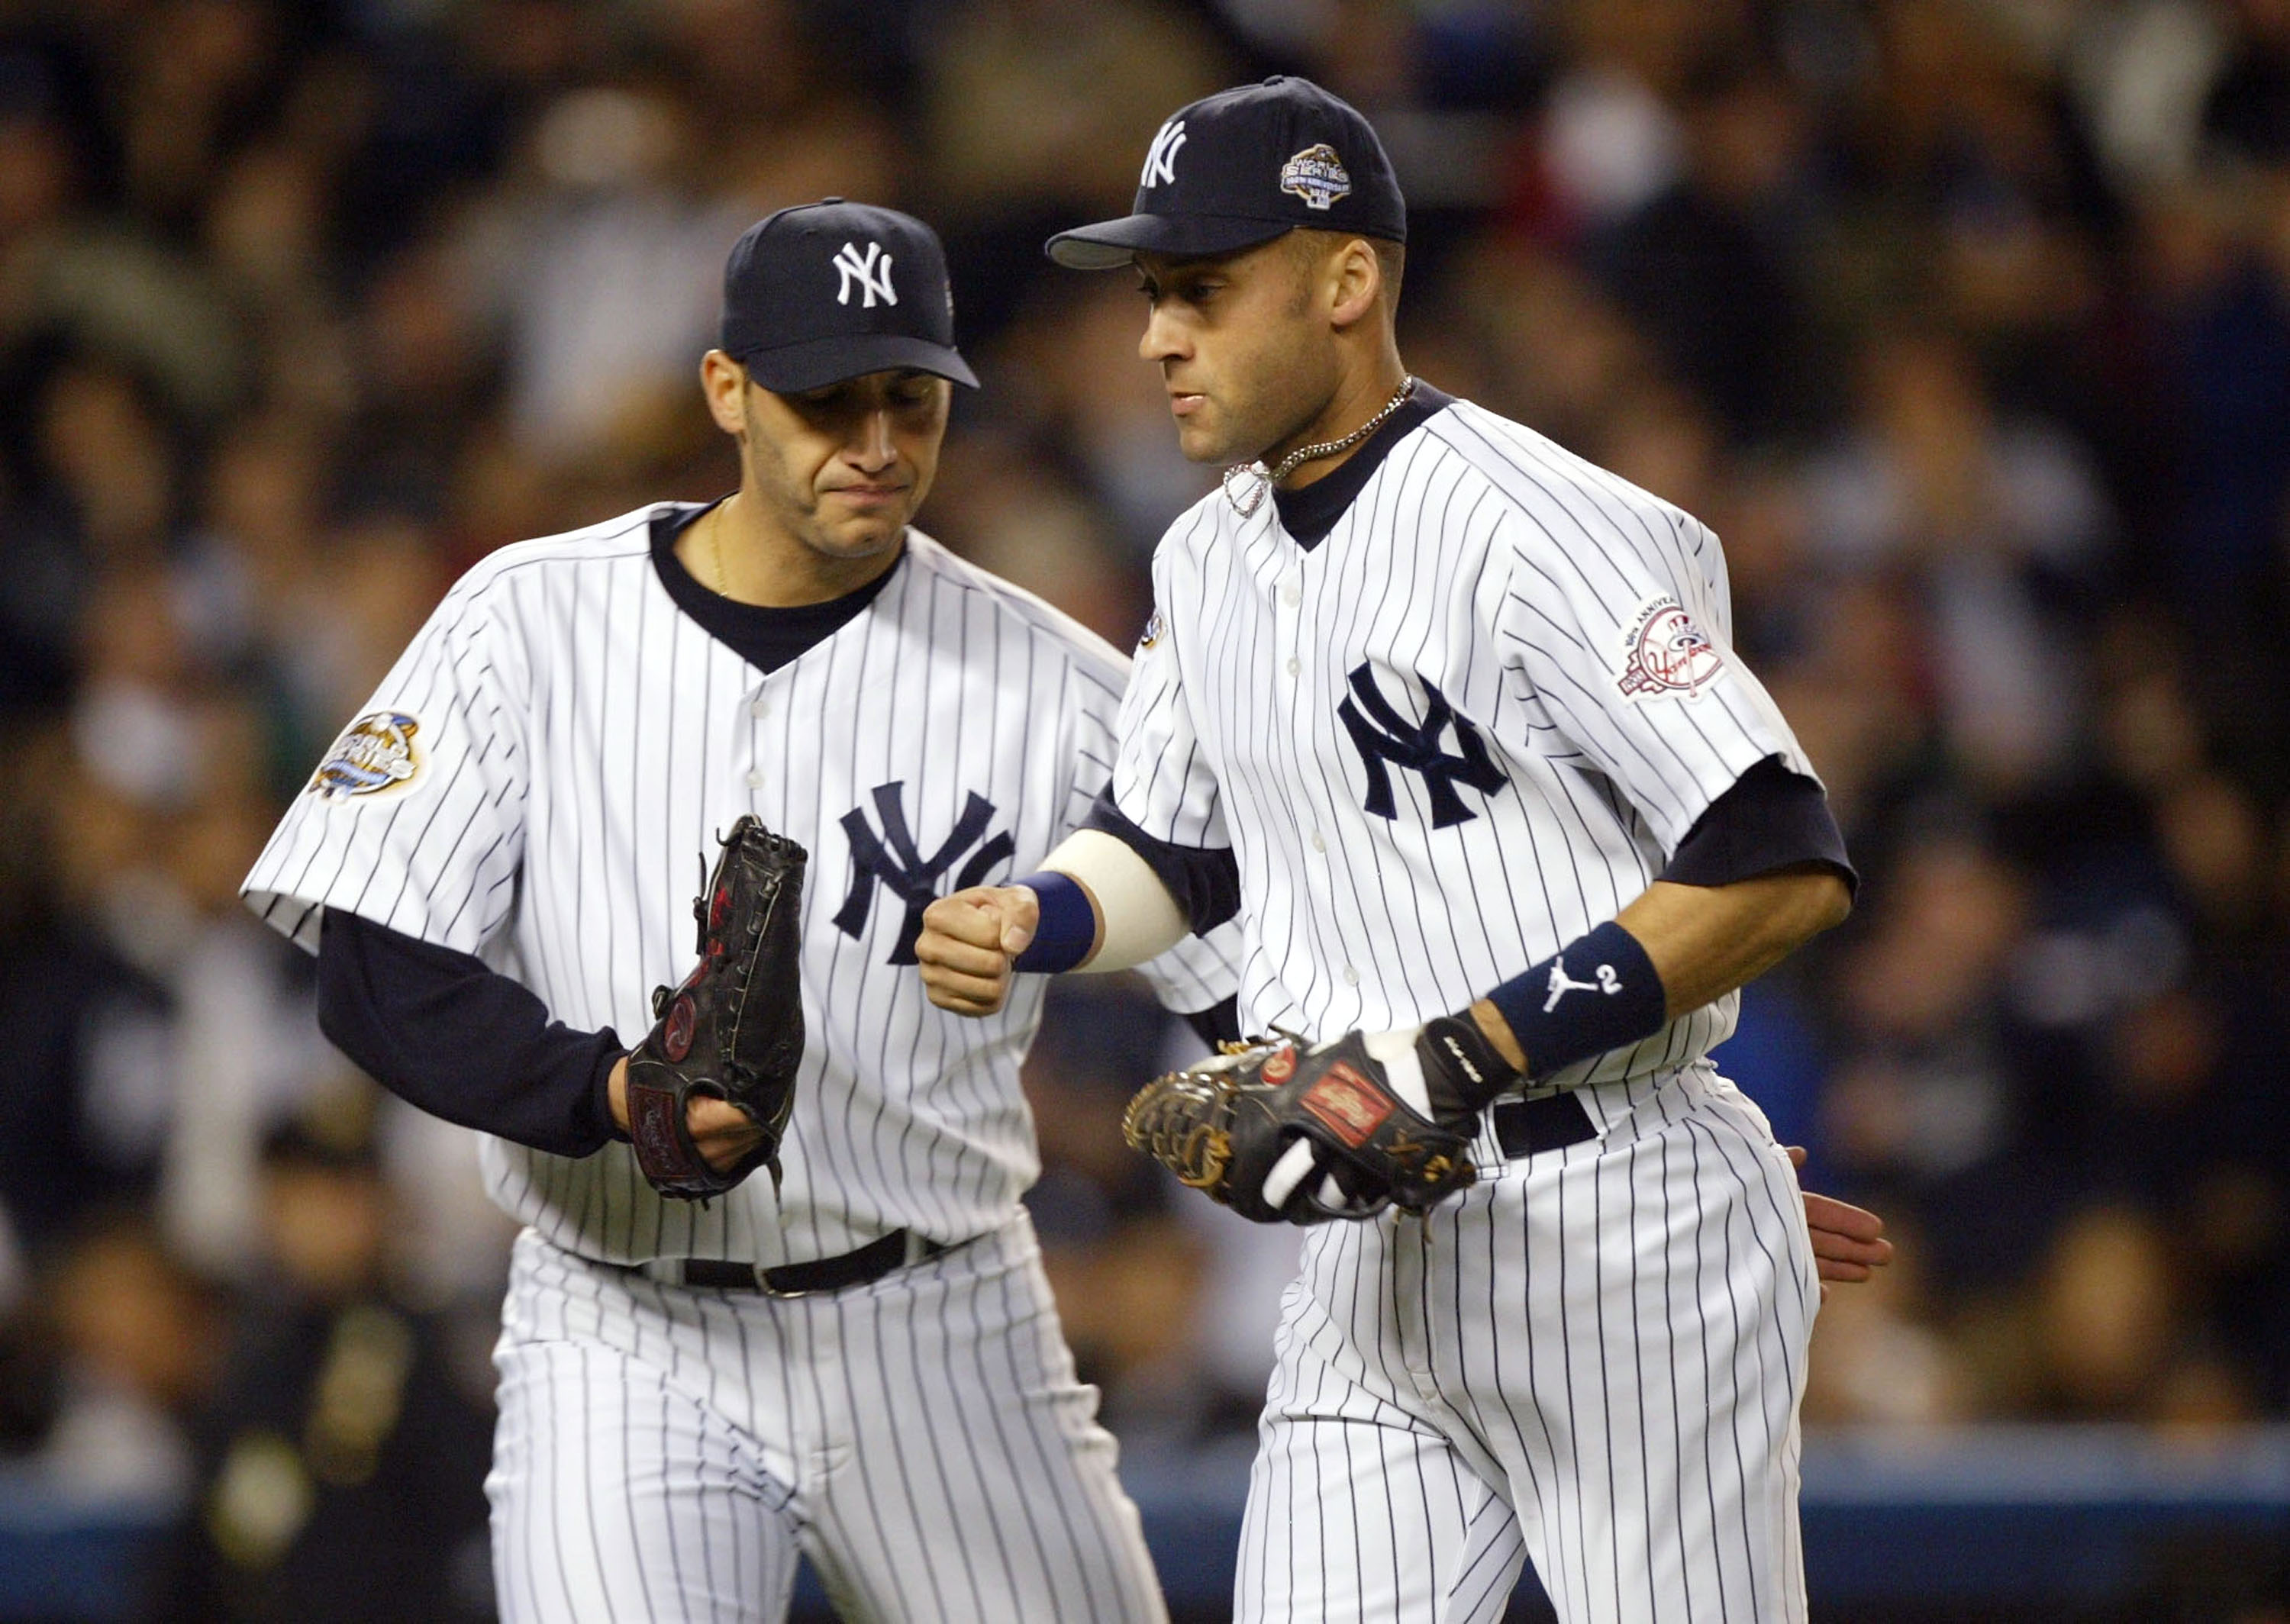 BRONX, NY - OCTOBER 25:  Starting pitcher Andy Pettitte #46 of the New York Yankees congratulates teammate Derek Jeter #2 after throwing out Mike Lowell #19 of the Florida Marlins in the forth inning during game six of the Major League Baseball World Seri